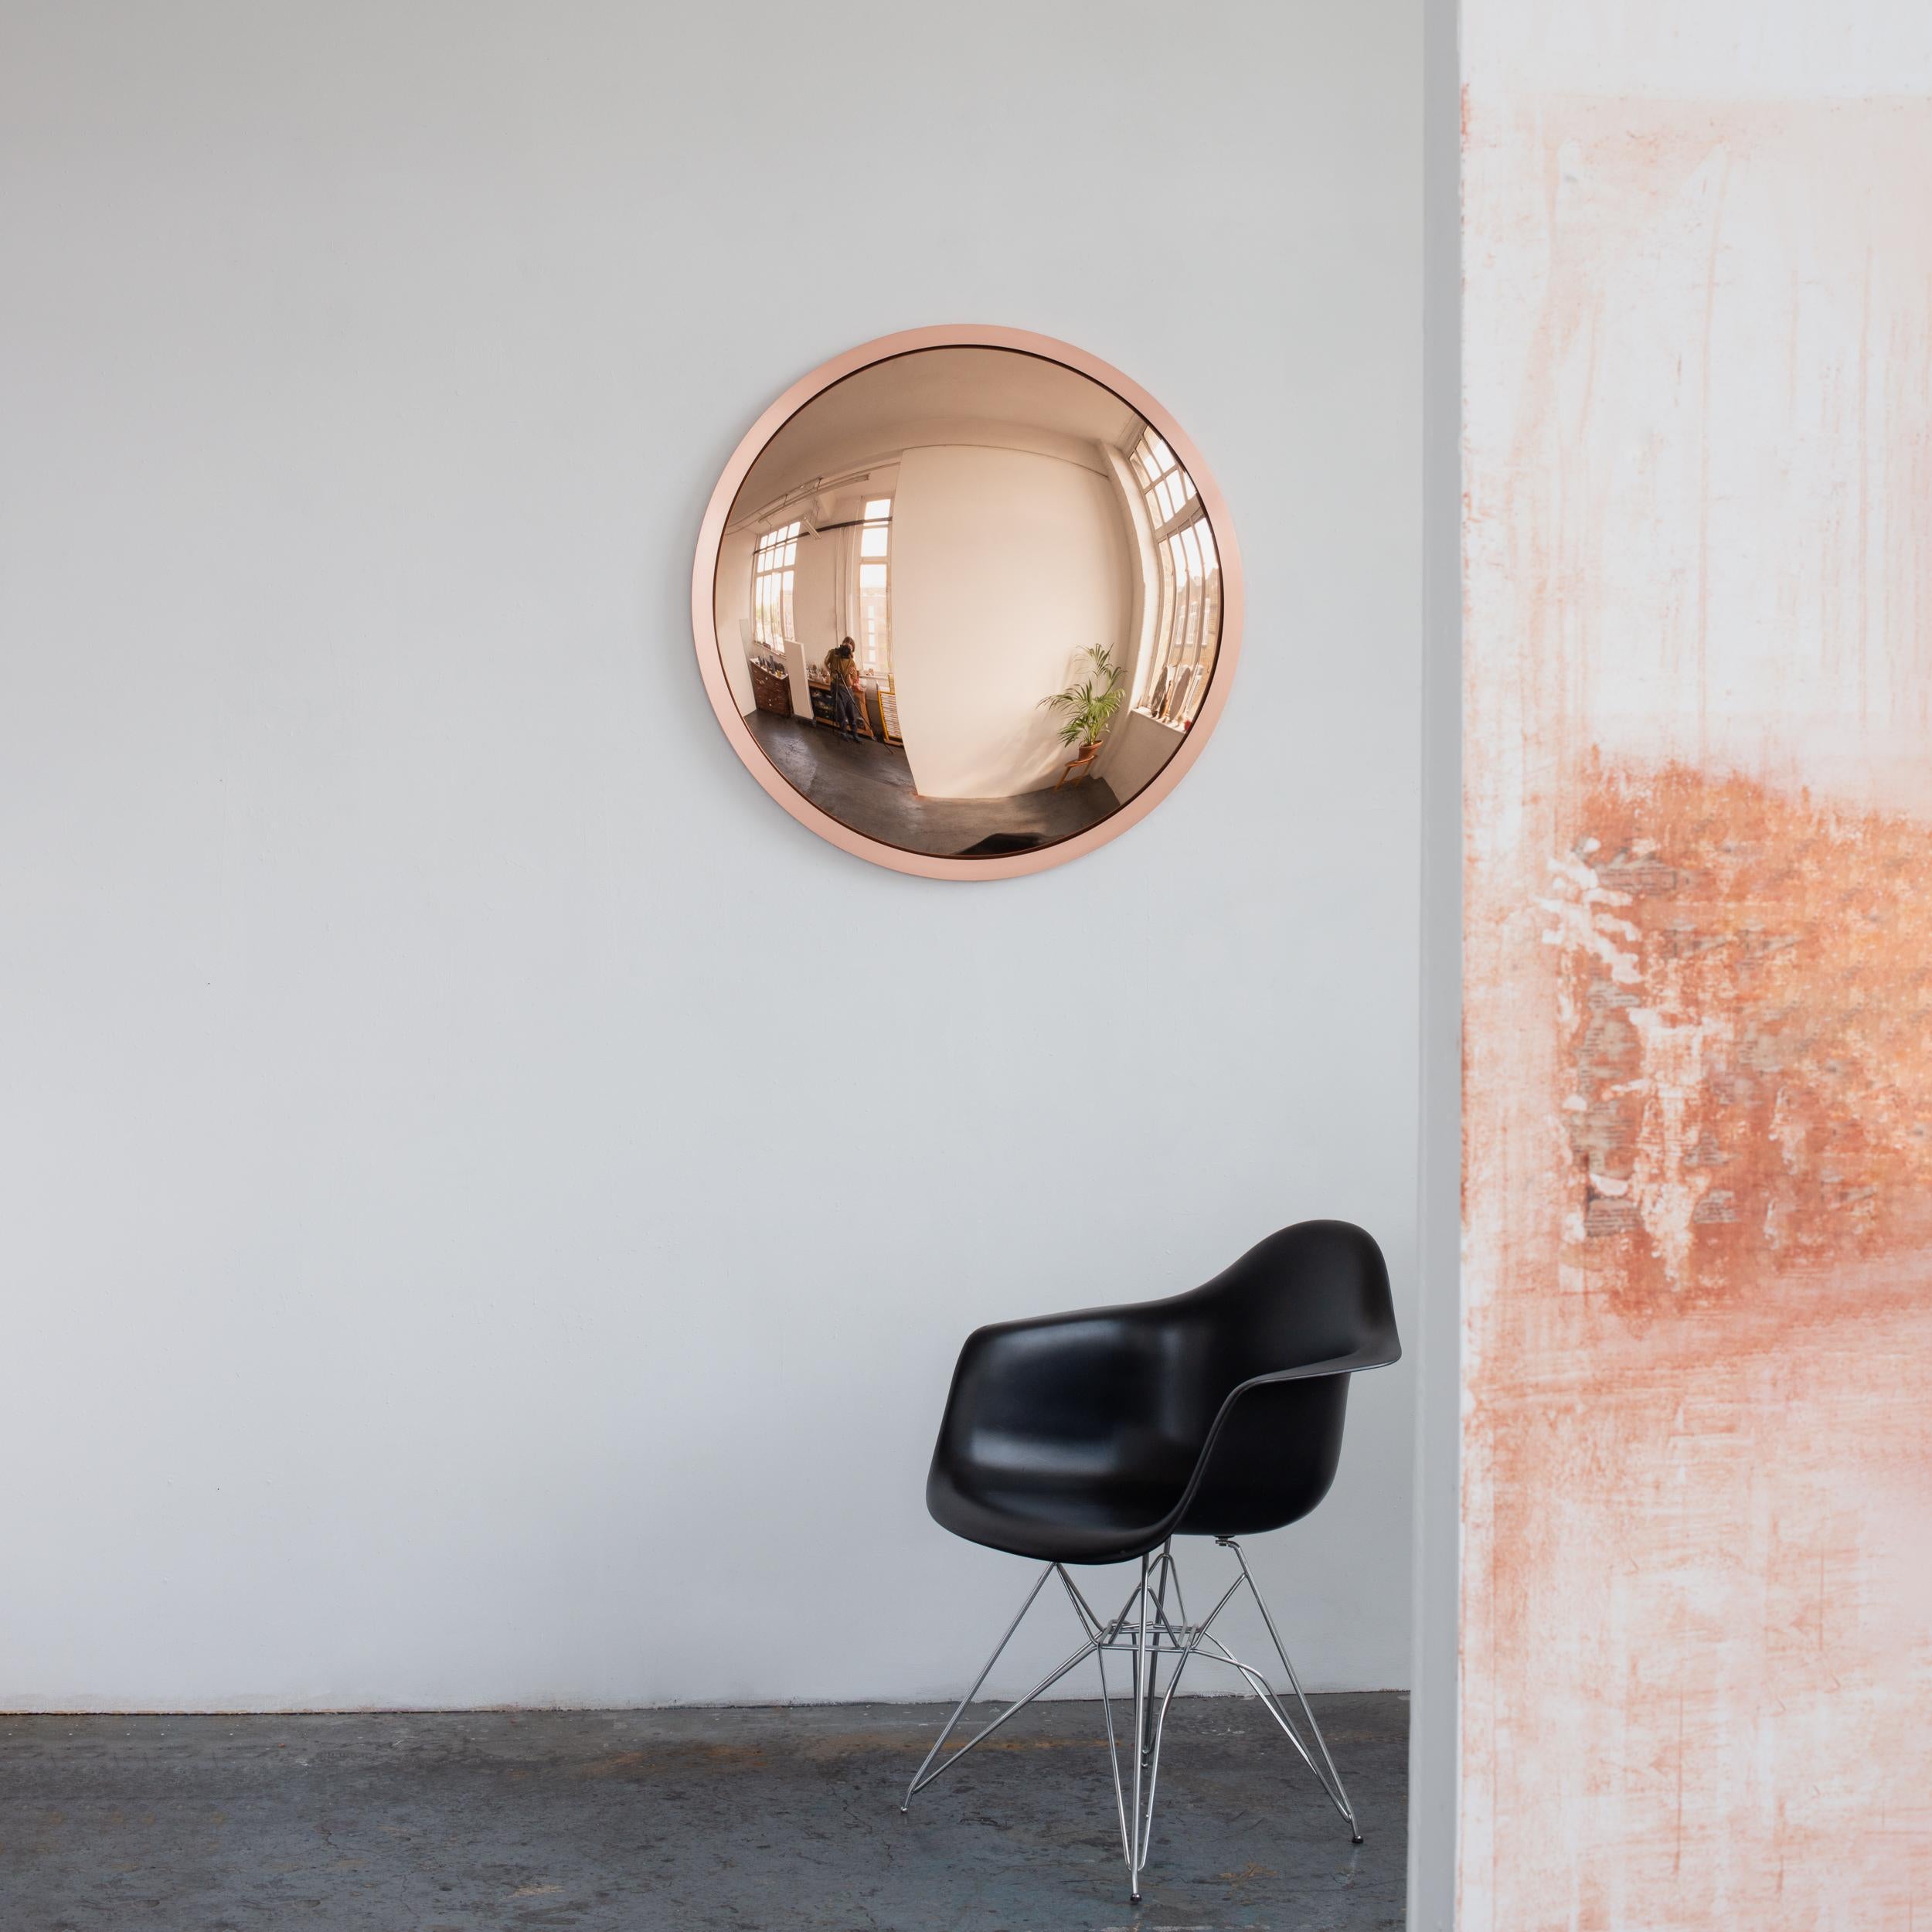 Stunning convex rose gold tinted mirror with a brushed copper frame.

Each Orbis™ convex mirror is designed and handcrafted in London, UK. Slight variations in sizes and imperfections on edges and surface finishes are characteristics of such